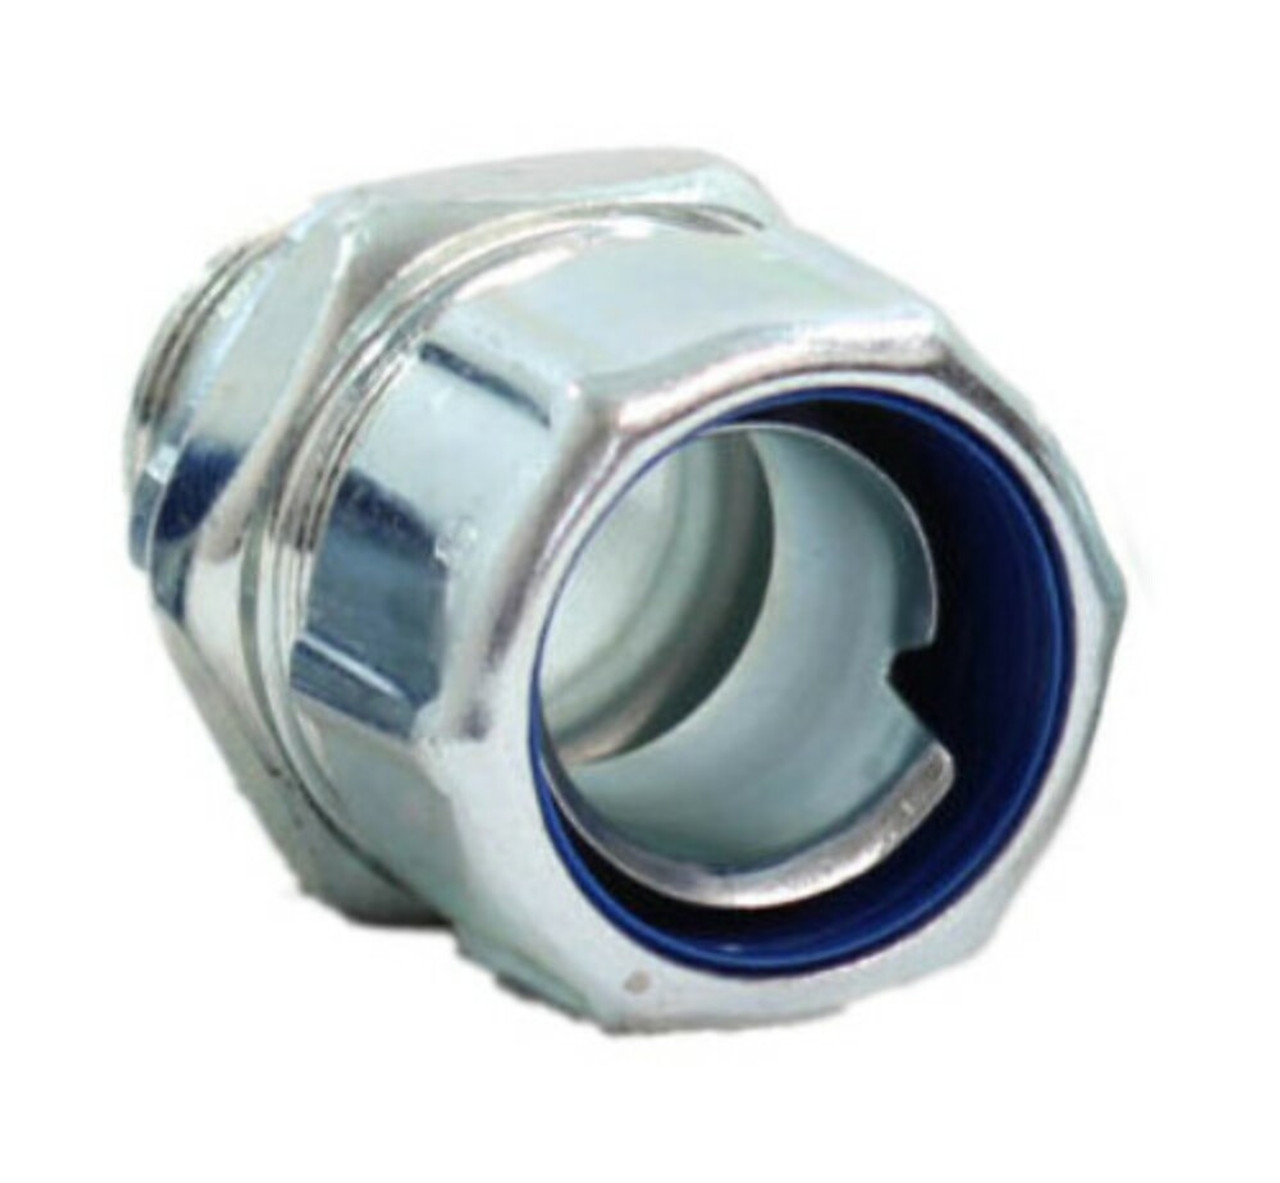 Thomas and Betts 5234 Straight Conduit Connector Material: Steel Size: 1 Inch Liquidtight, for Flexible Metal Conduit, 5234-TB